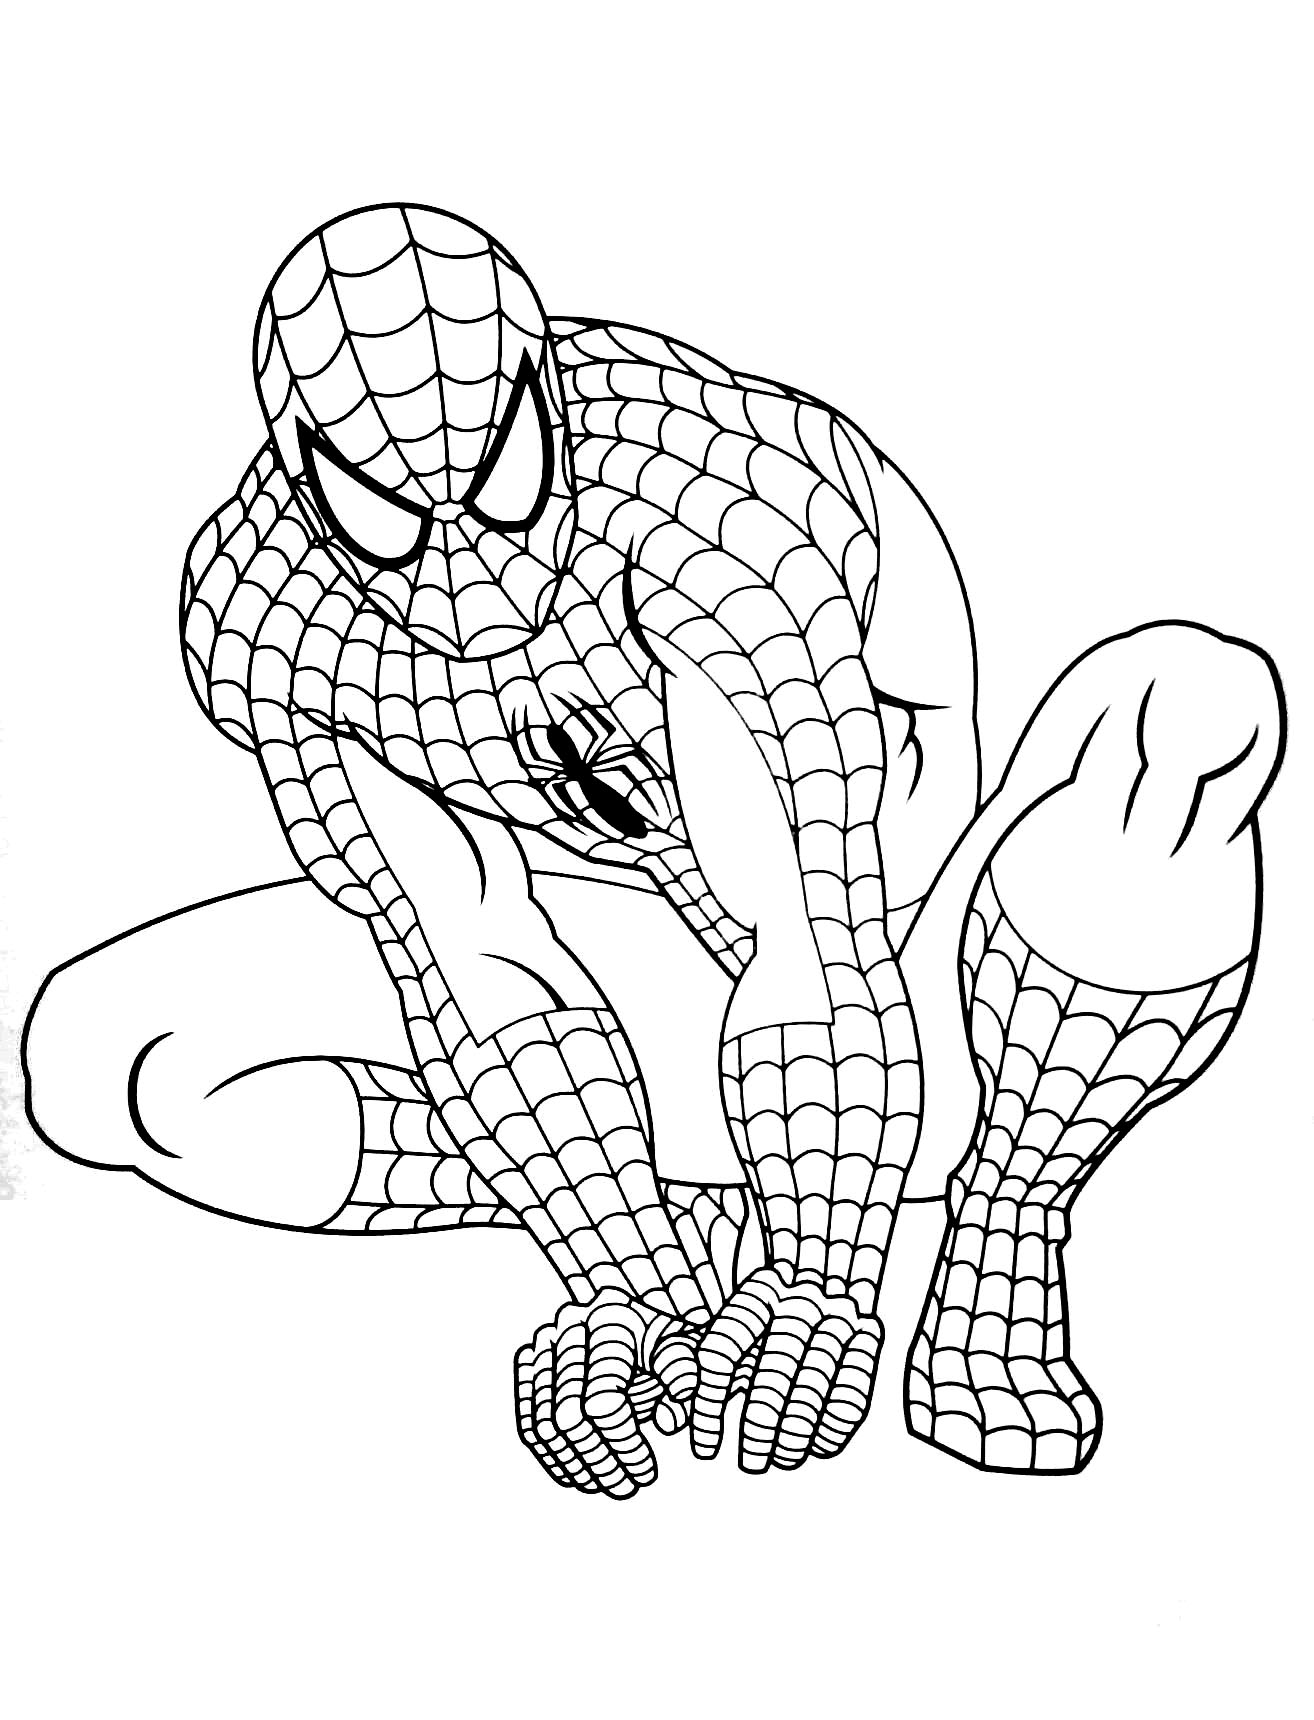 Spiderman to print for free - Spiderman Kids Coloring Pages